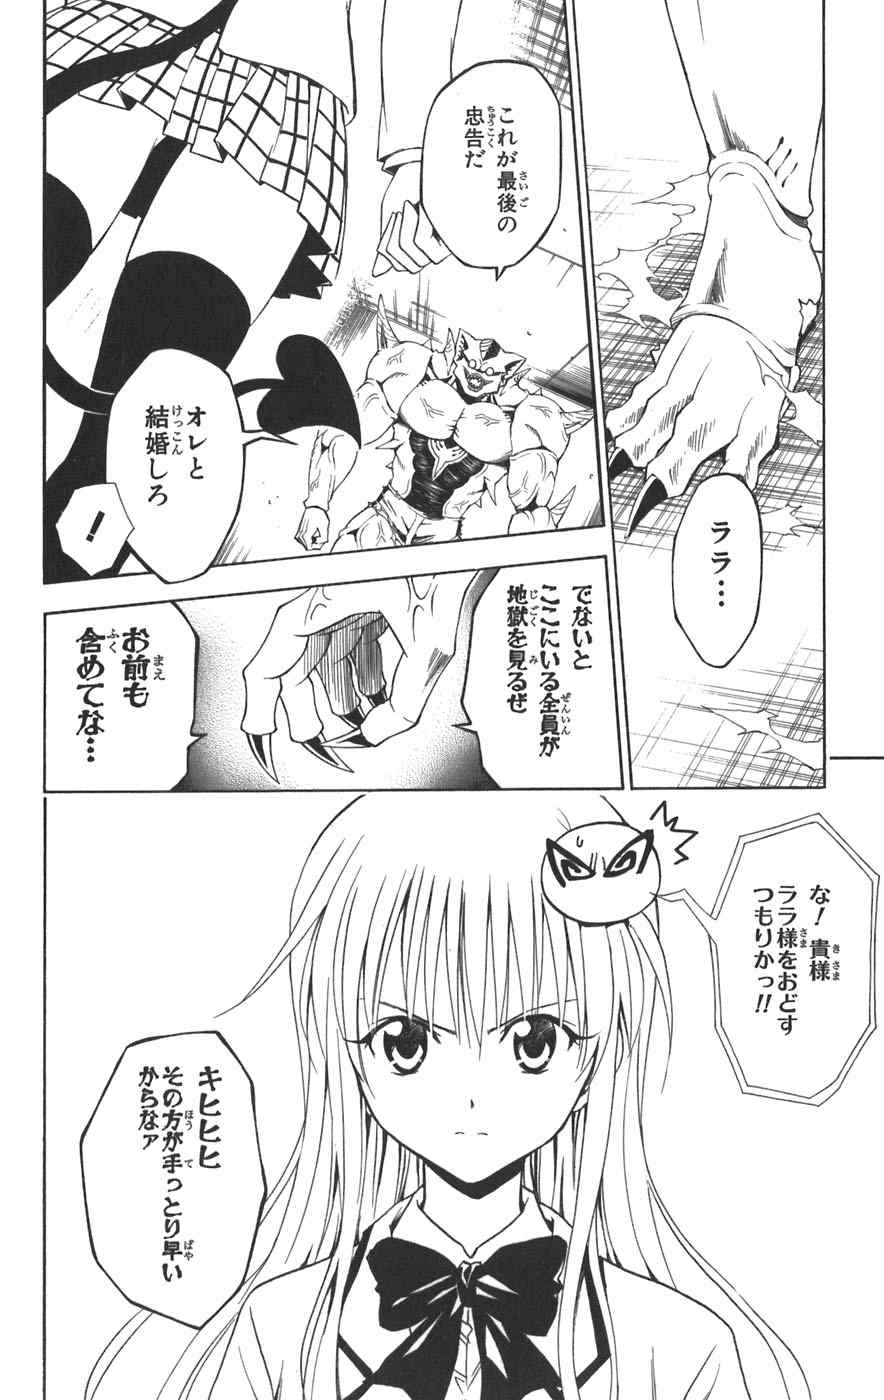 《To LOVEるとらぶる》漫画 To LOVE 02卷